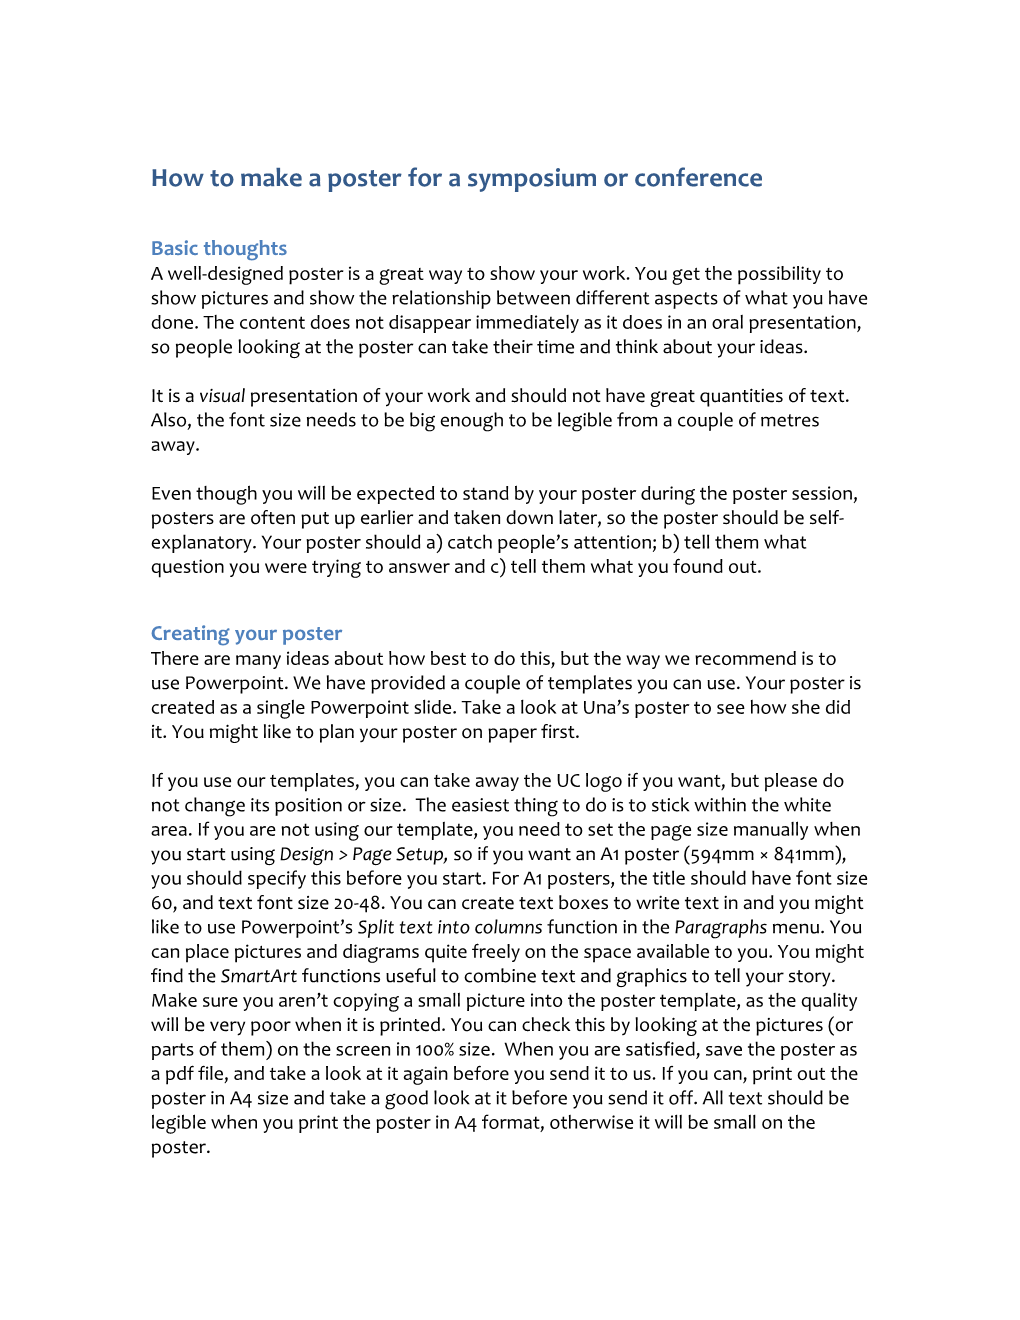 How to Make a Poster for a Symposium Or Conference